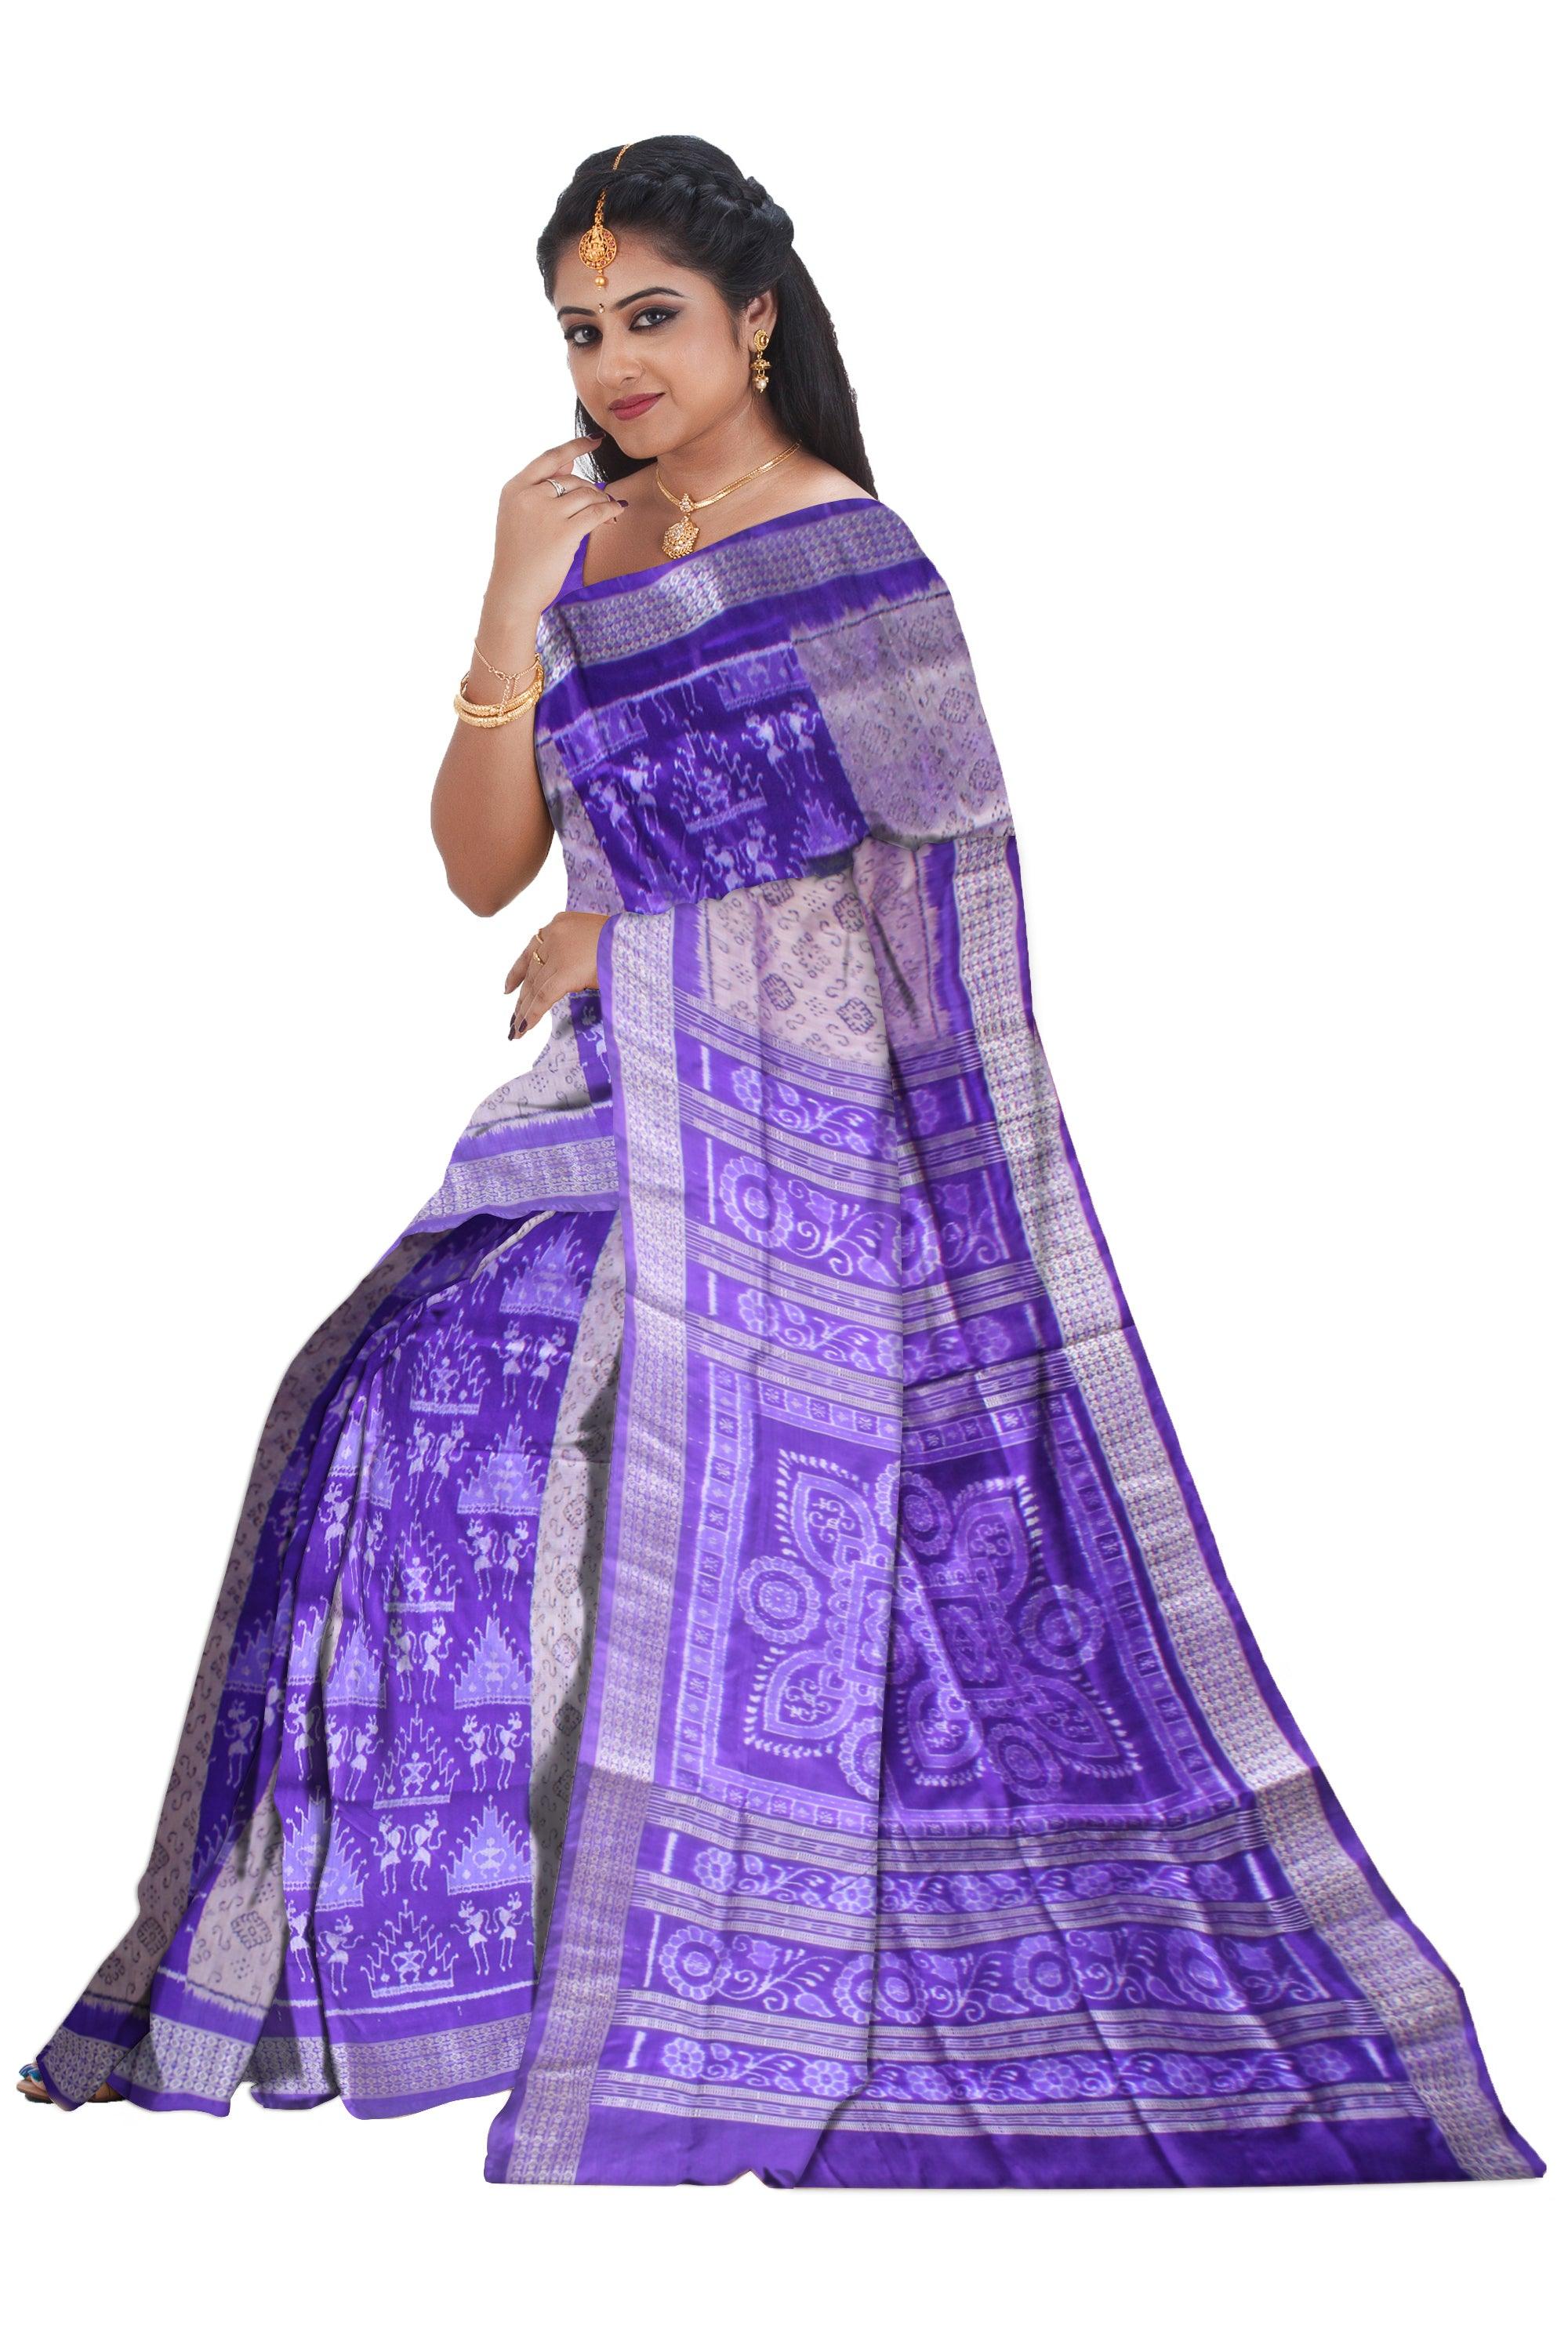 LATEST NEW TERRACOTTA BASED PATA SAREE IN  PUPLE AND GREY AVAILABLE WITH BLOUSE . - Koshali Arts & Crafts Enterprise